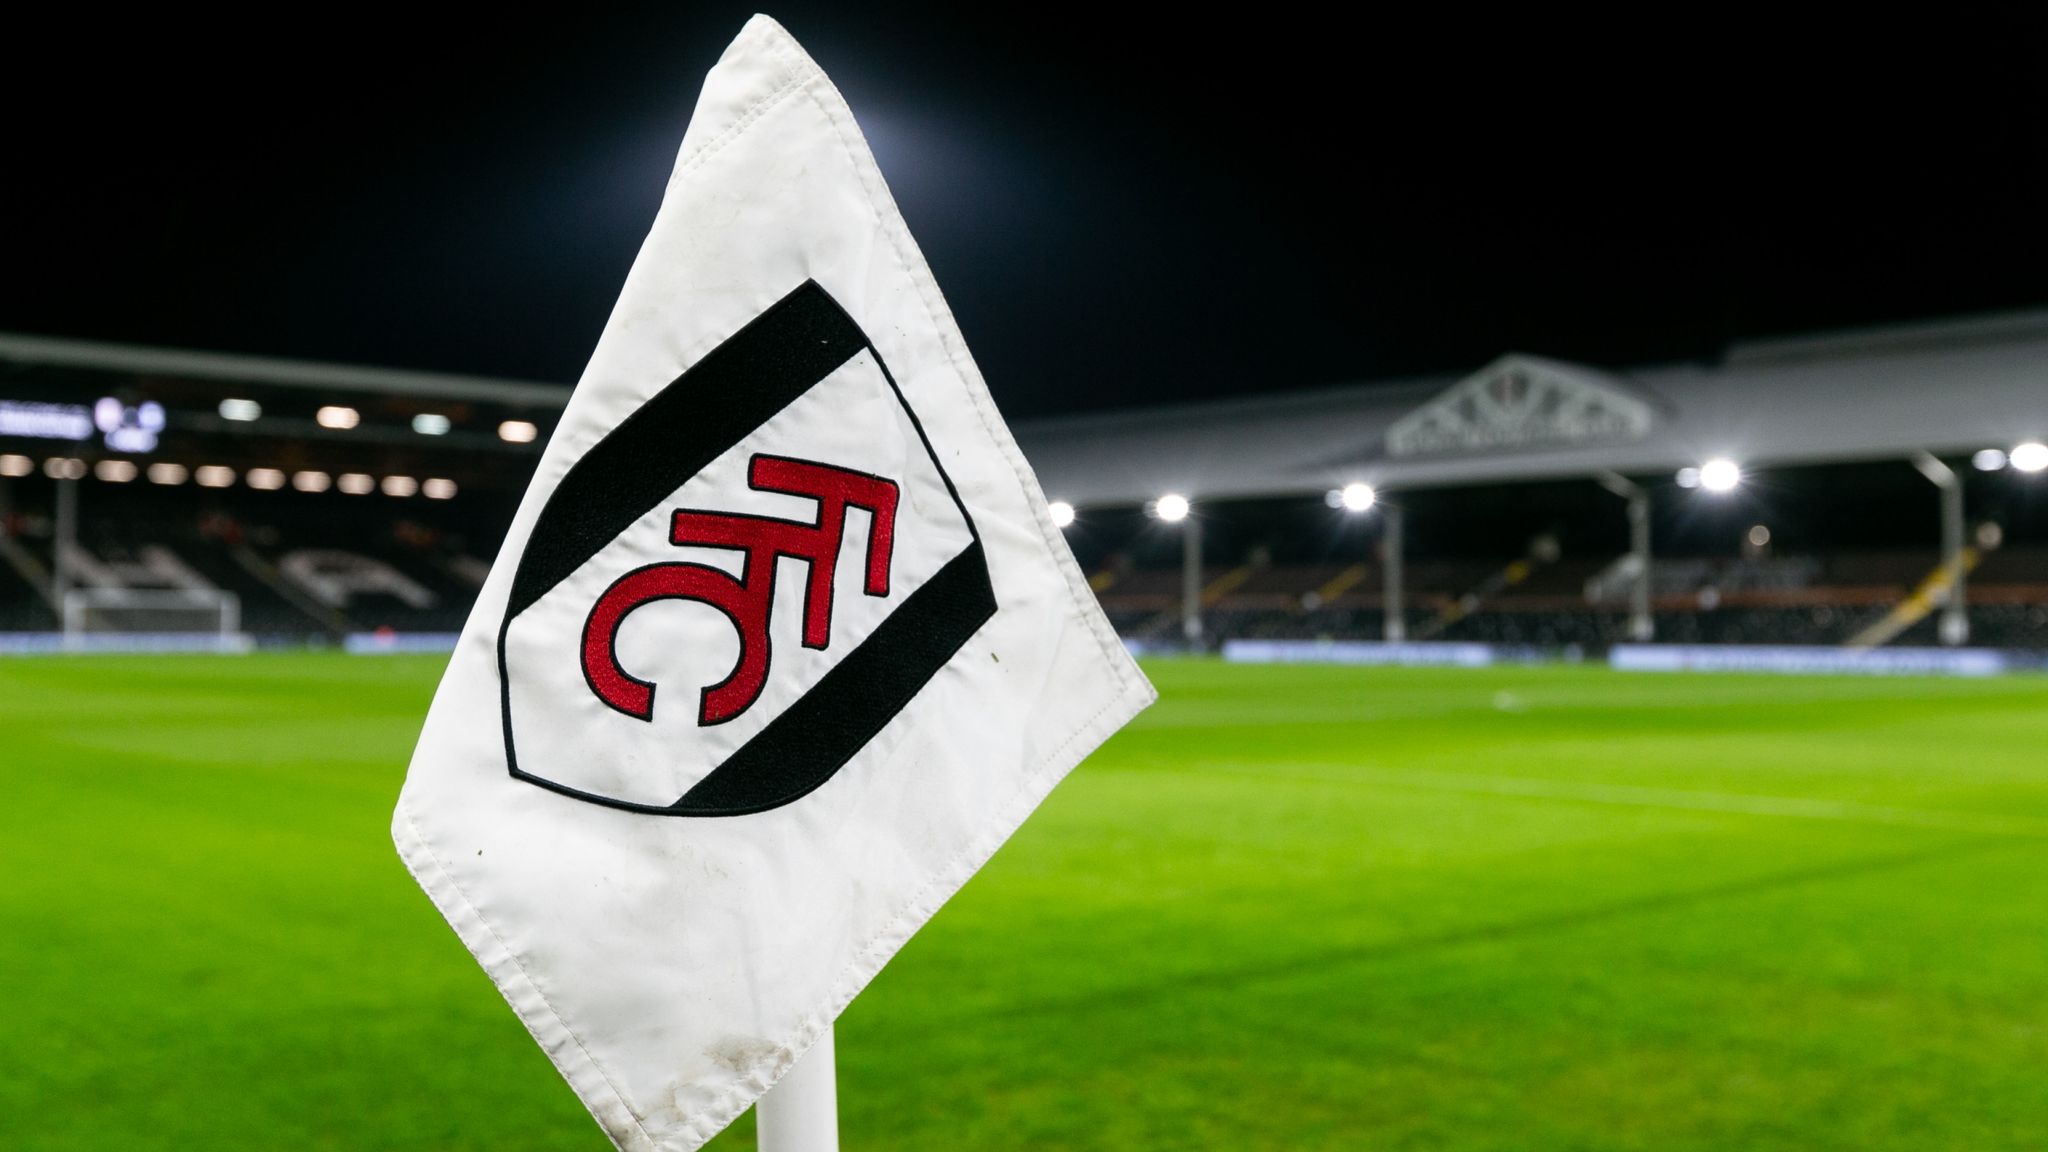 BBC Report: Fulham are hosting Sheffield United at Craven Cottage on Saturday as all signs point towards a morale-boosting win…